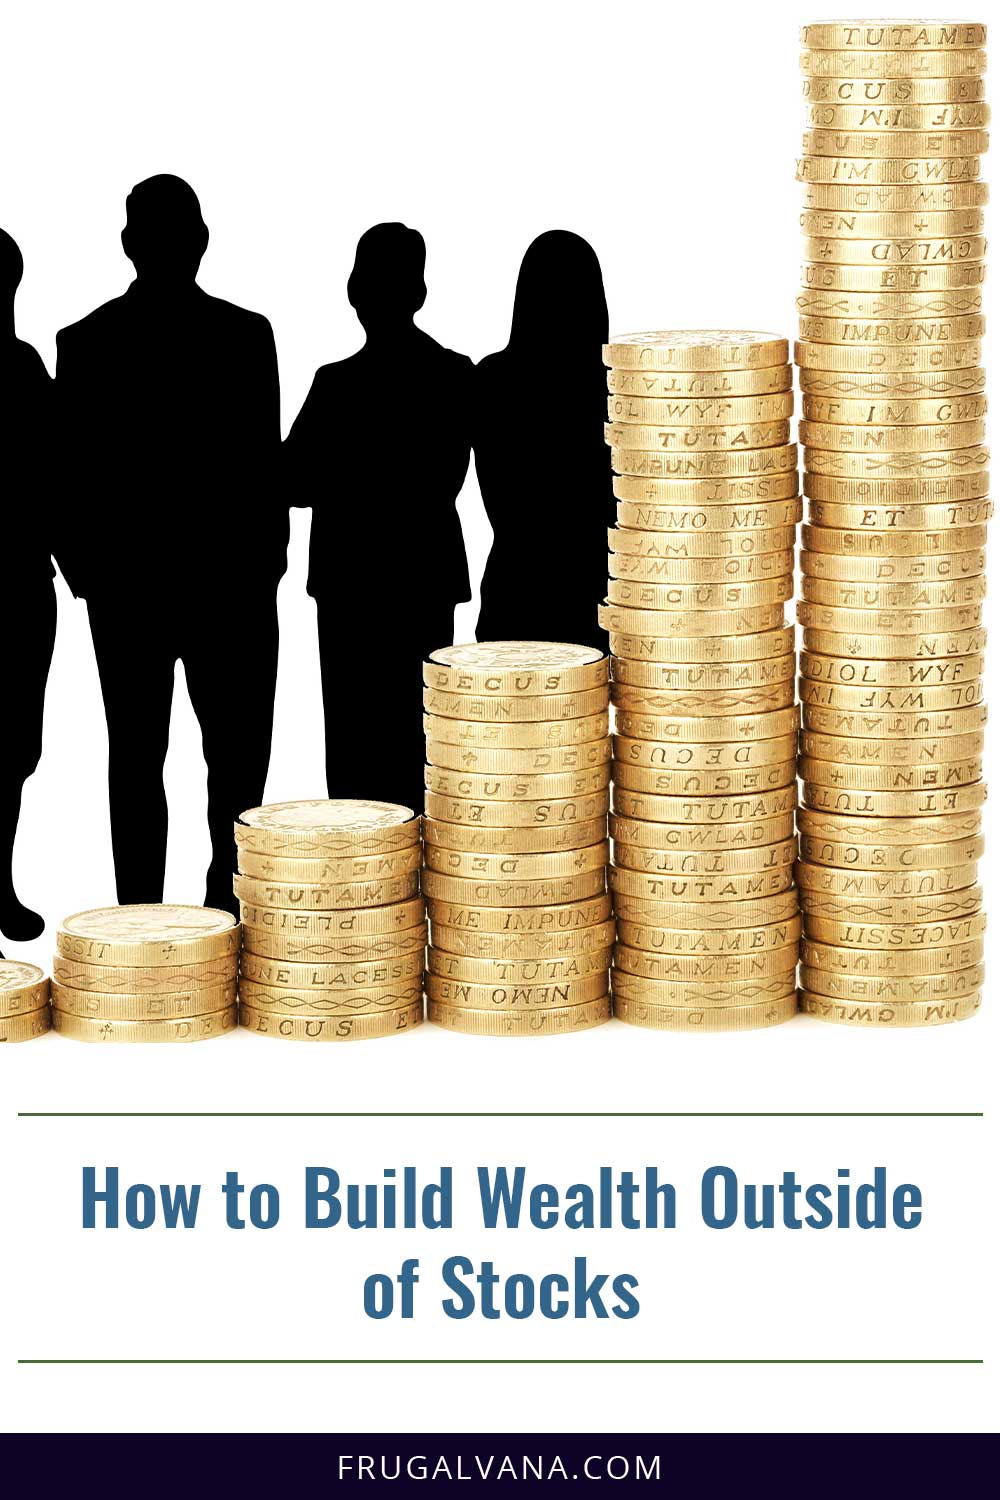 How to Build Wealth Outside of Stocks